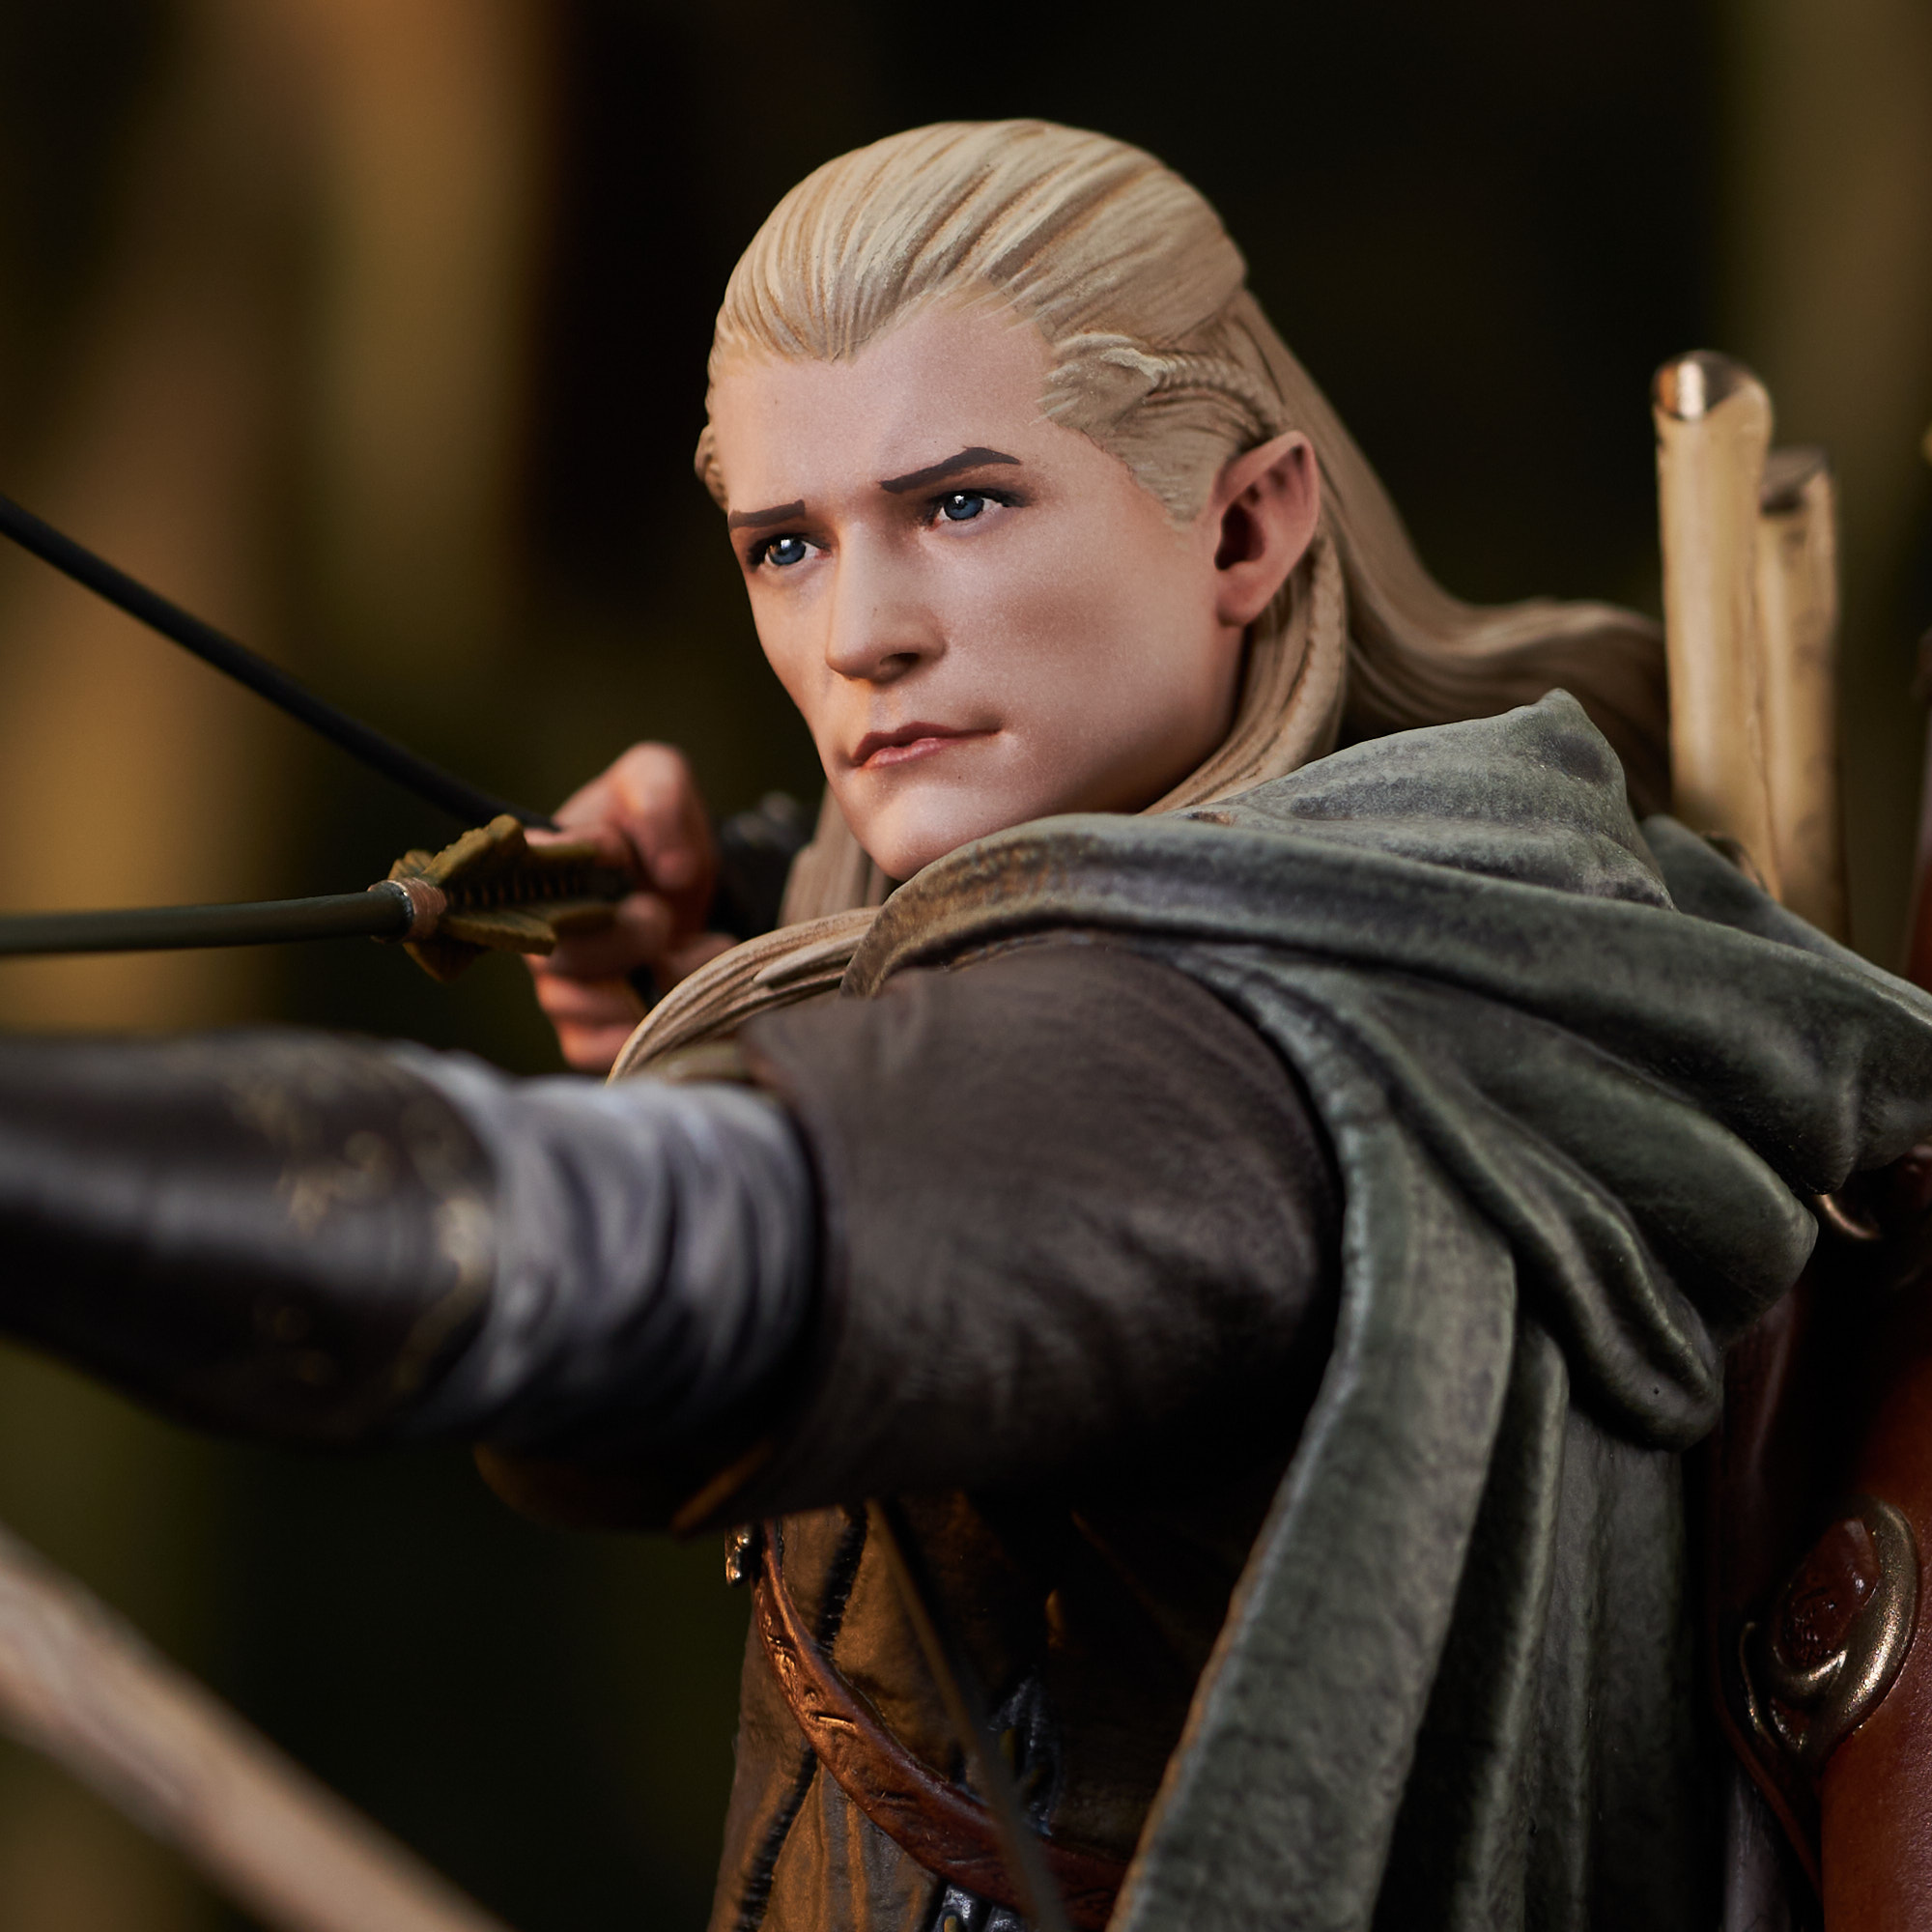 First Look: Diamond Select Lord of the Rings Legolas Diorama